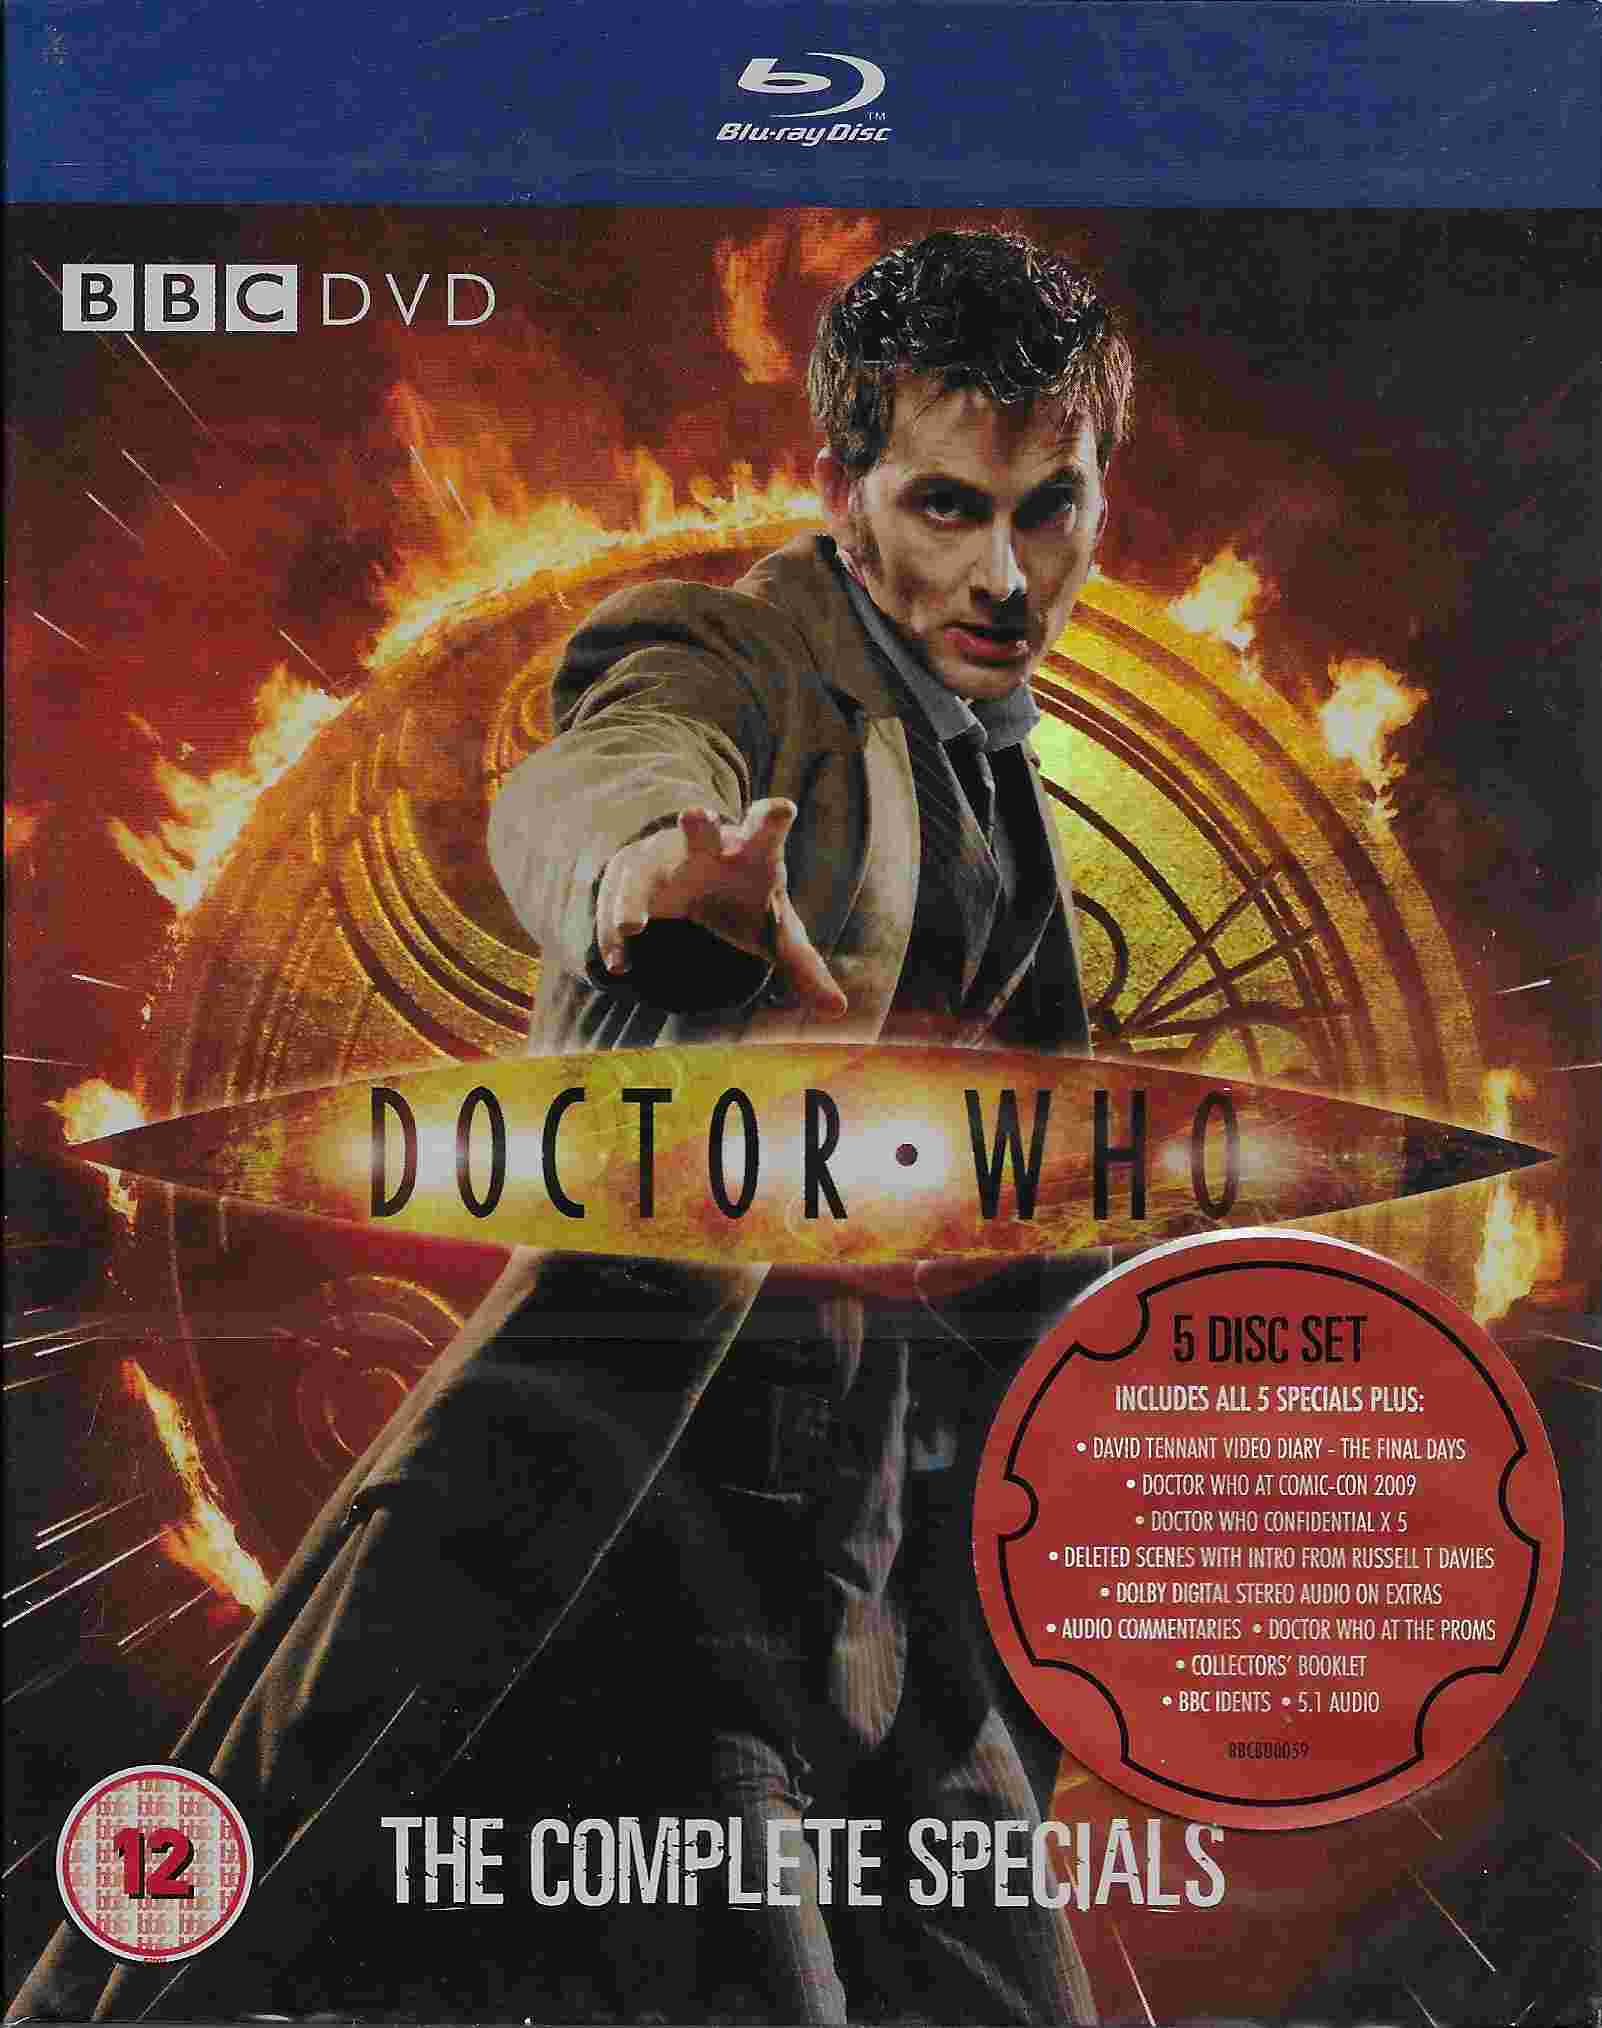 Picture of BBCBD 0059 Doctor Who - The complete specials by artist Russell T Davies / Gareth Roberts / Phil Ford from the BBC records and Tapes library